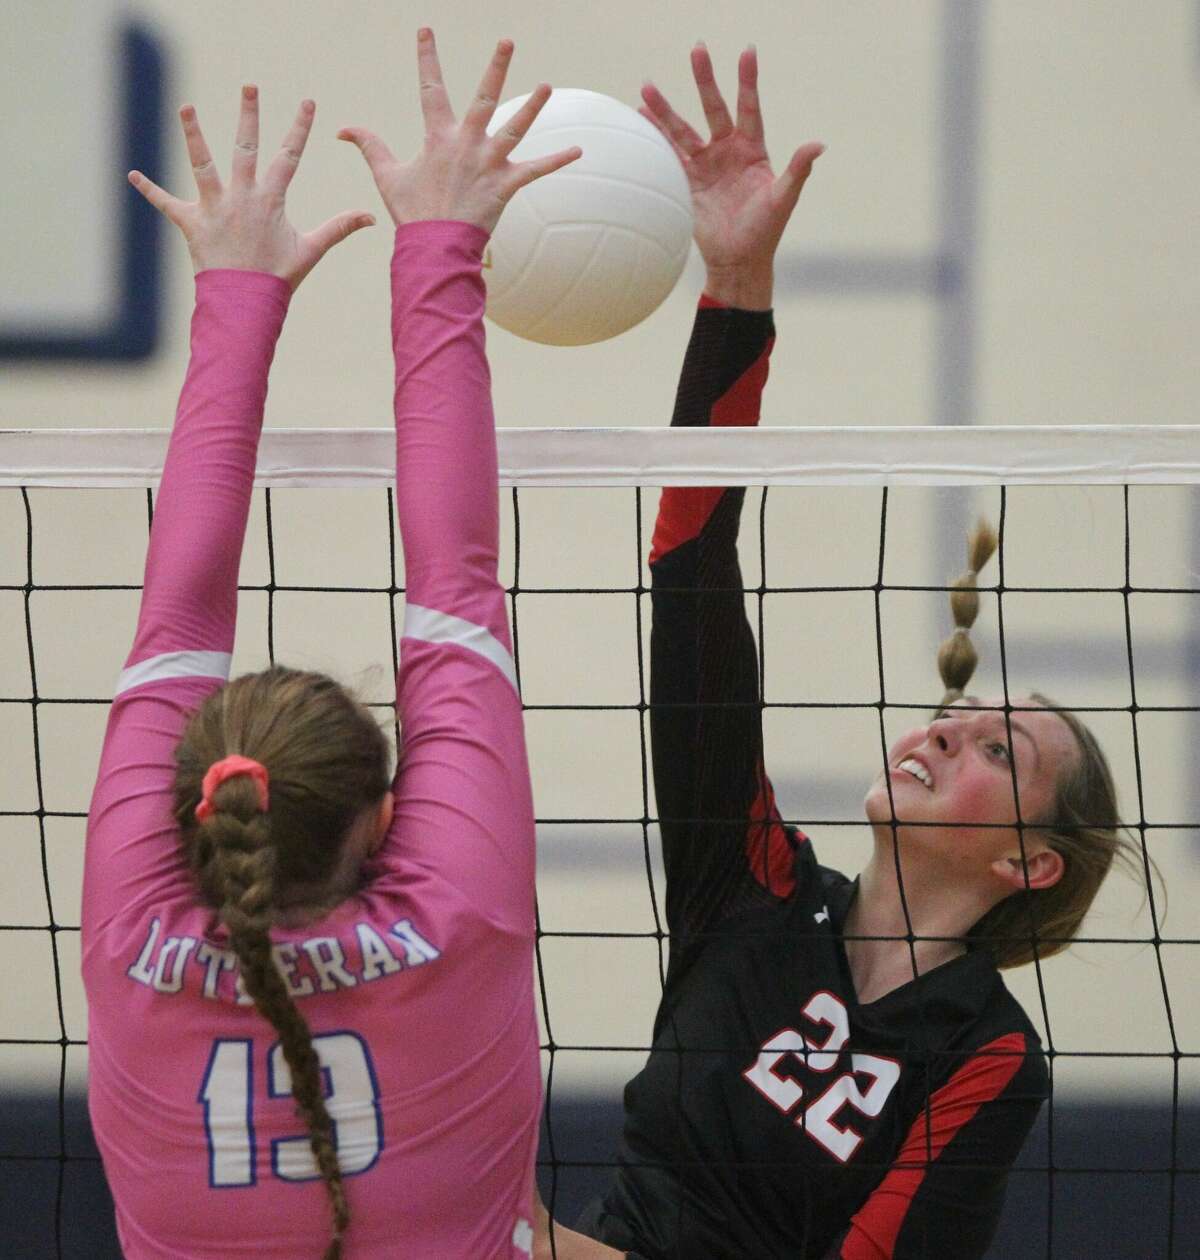 Calhoun's Abby Johnes spikes the ball against Springfield Lutheran in the semifinals of the North Greene Sectional Monday night in White Hall. Lutheran beat Calhoun 25-23, 25-23. The Crusaders advance to the sectional championship game, where they will face Mendon Unity, a 25-19, 25-19 winner over Raymond Lincolnwood in Monday's second semifinal match.